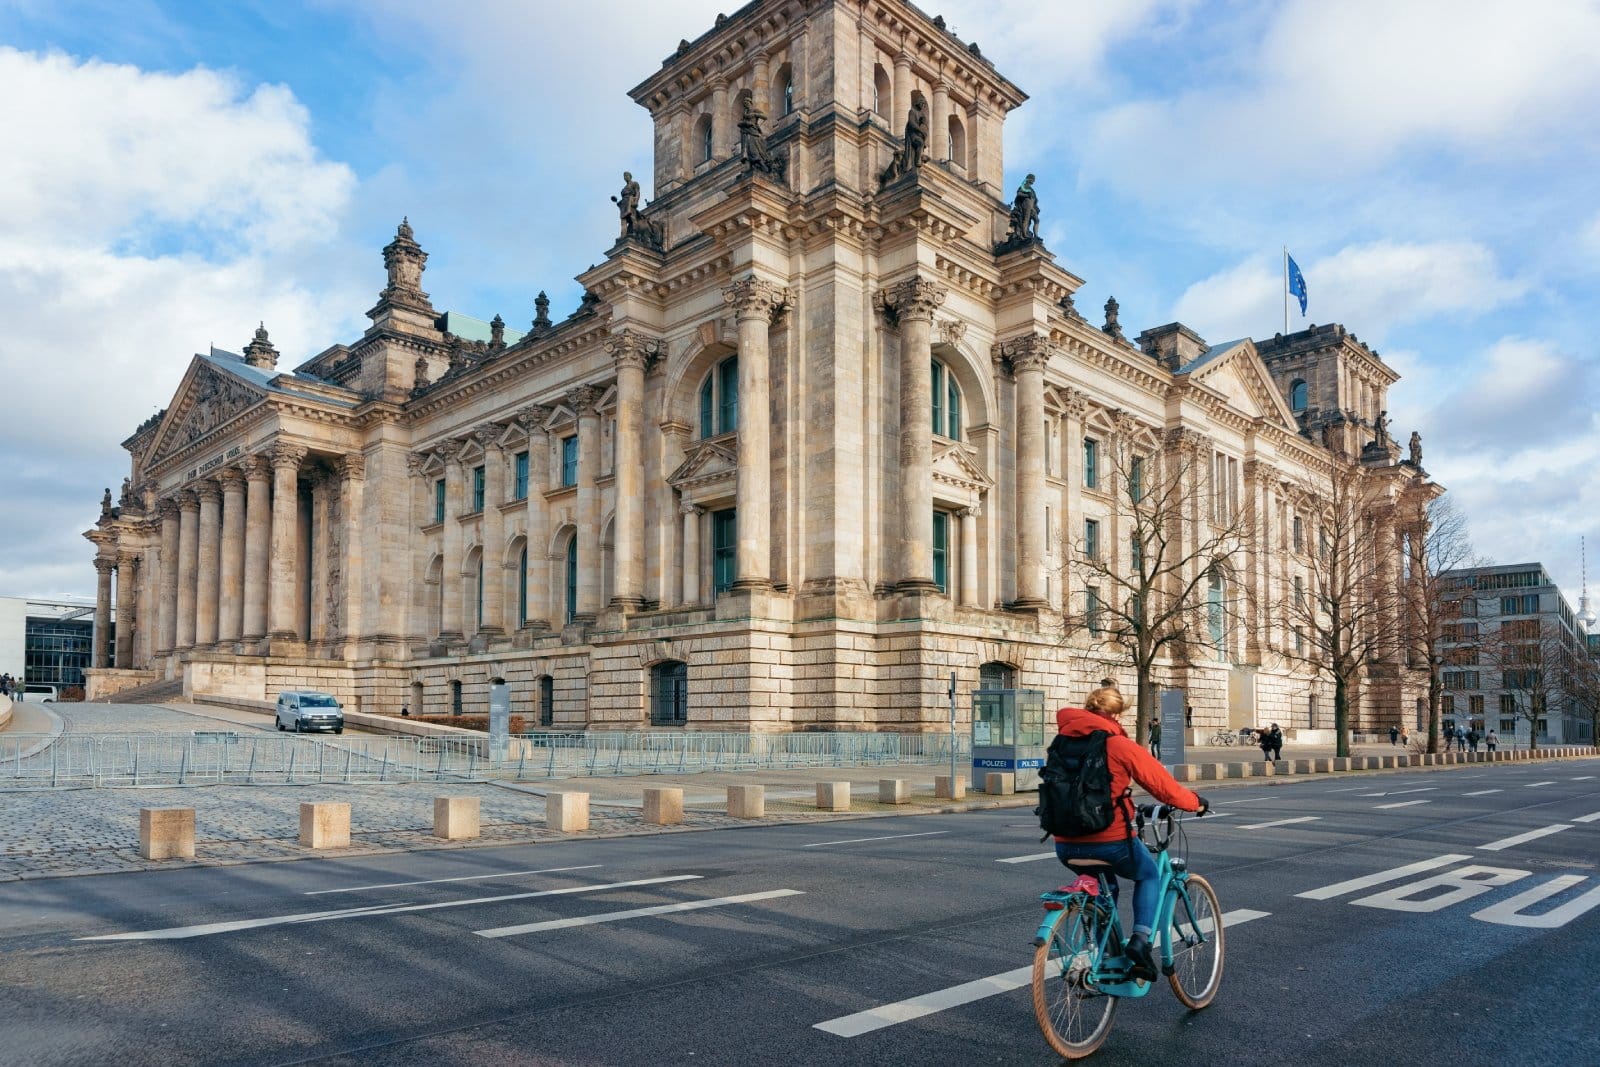 Image Credit: Shutterstock / Roman Babakin <p><span>Berlin has emerged as a leading city for vegan and vegetarian living, boasting an impressive array of plant-based eateries, from casual cafés to fine dining restaurants. The city’s progressive and eco-conscious ethos is reflected in its food scene, focusing on sustainability and organic ingredients. Berlin’s diverse culinary landscape means you can enjoy a range of cuisines, all adapted to meet vegan and vegetarian needs.</span></p> <p><b>Insider’s Tip: </b><span>Explore the vegan-friendly neighborhoods of Kreuzberg and Neukölln, where you’ll find everything from vegan doner kebabs to plant-based ice cream parlors.</span></p>